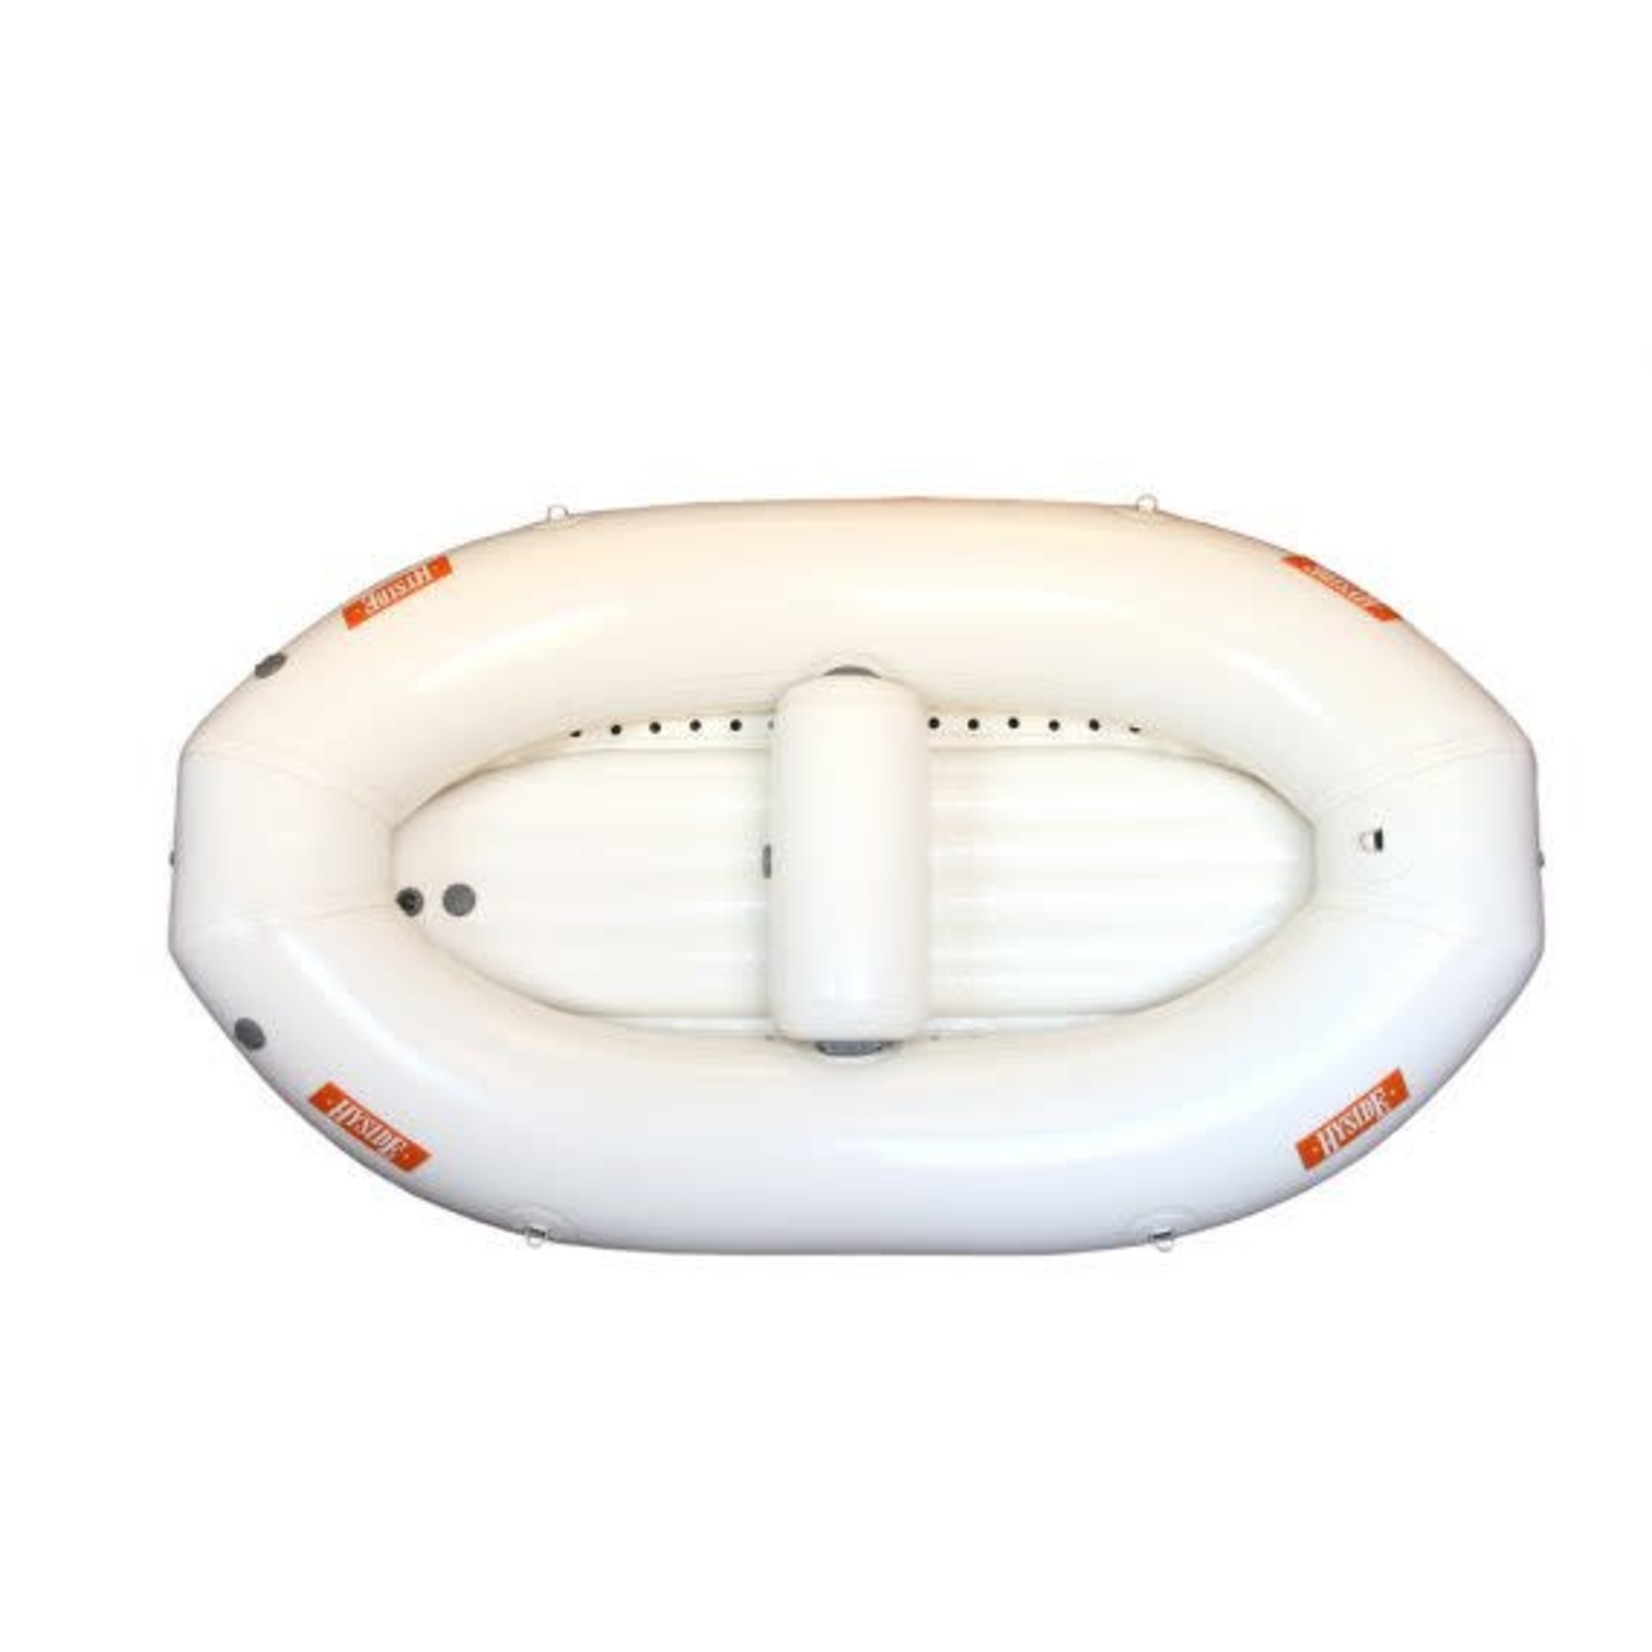 Hyside Inflatables Hyside Outfitter 9.0 Mini-Me Raft